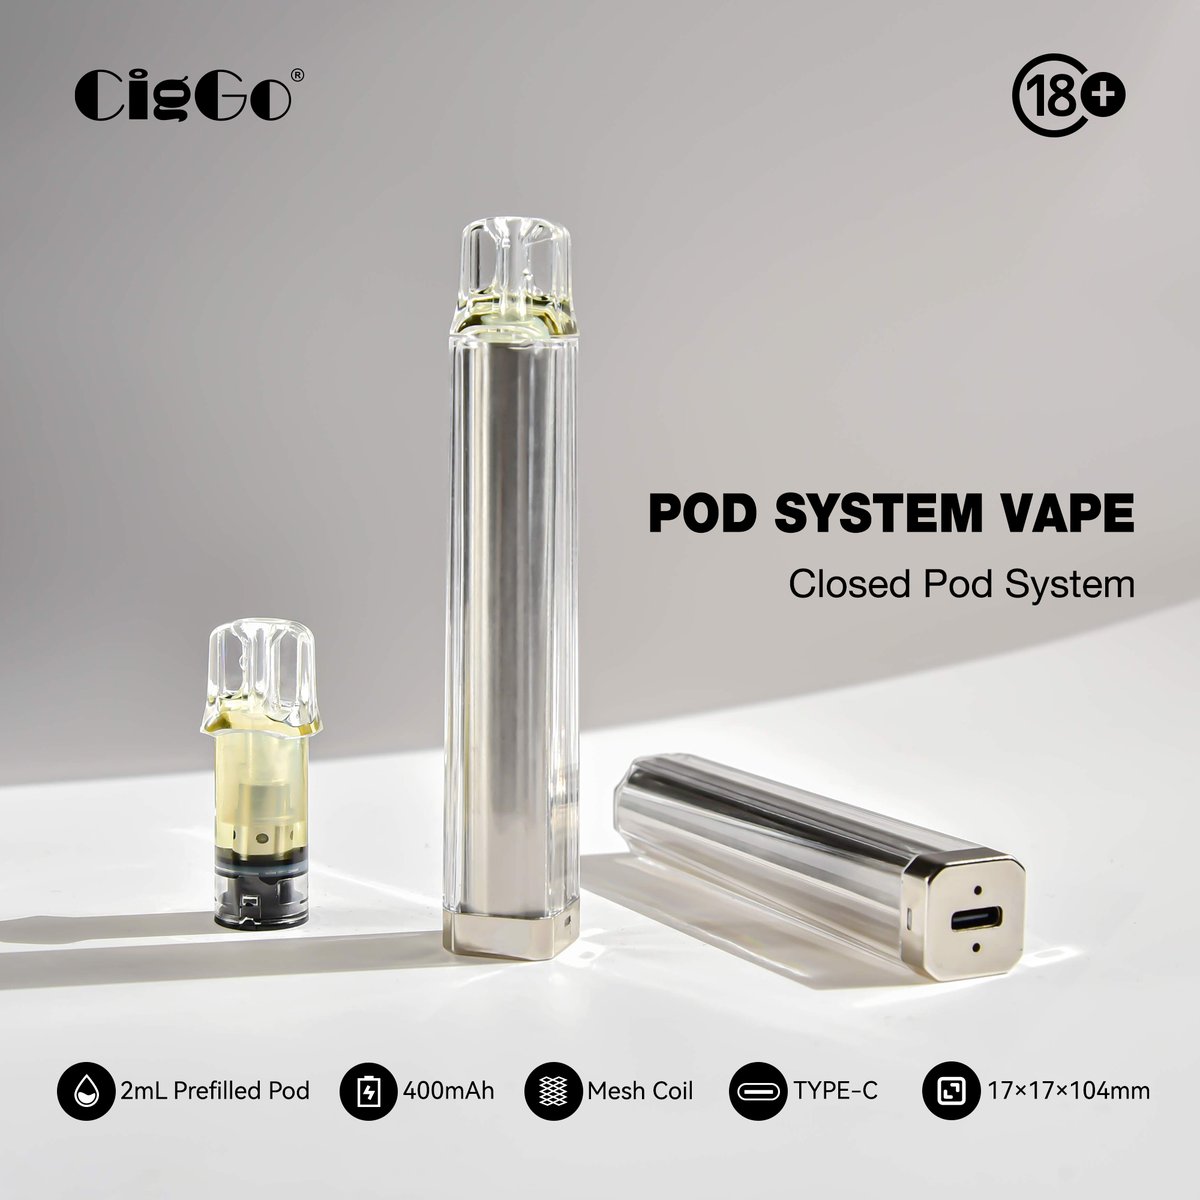 CigGo Closed Pod System Vape Device.

-2ml prefilled pod.
-400mAh rechargeable battery.
-Mesh coil.
-Type-C charging port.

Production license number 514403016

Only for adults(21+).

#Ciggovape #Locktank #Ciggo #Bysoul #Bysoulkit #Hipuff